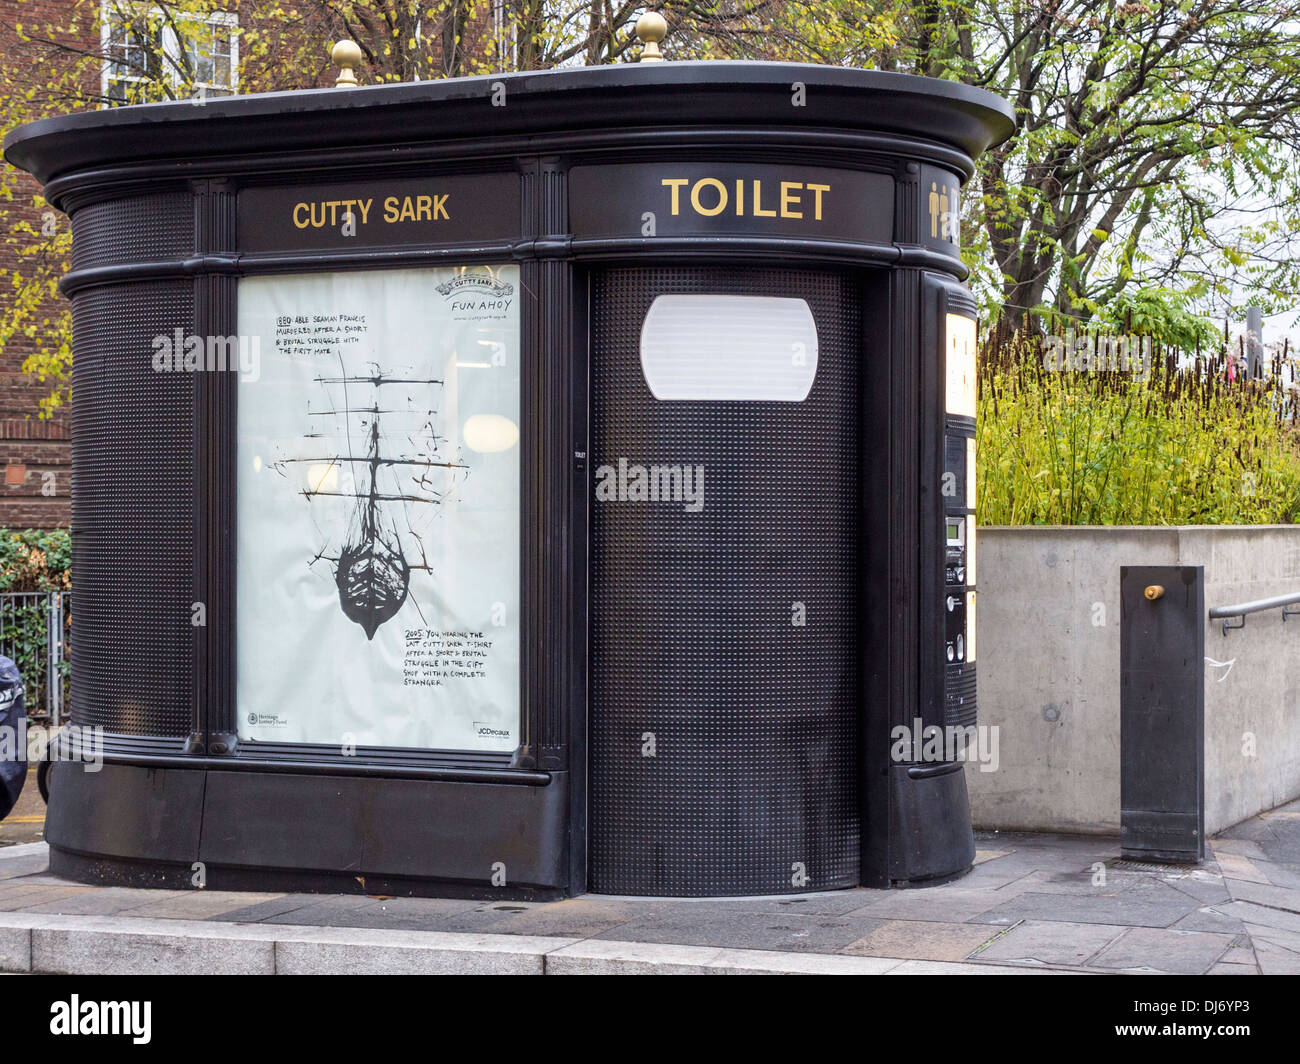 Public unisex toilet and poster at site of the Cutty Sark at Greenwich, London Stock Photo